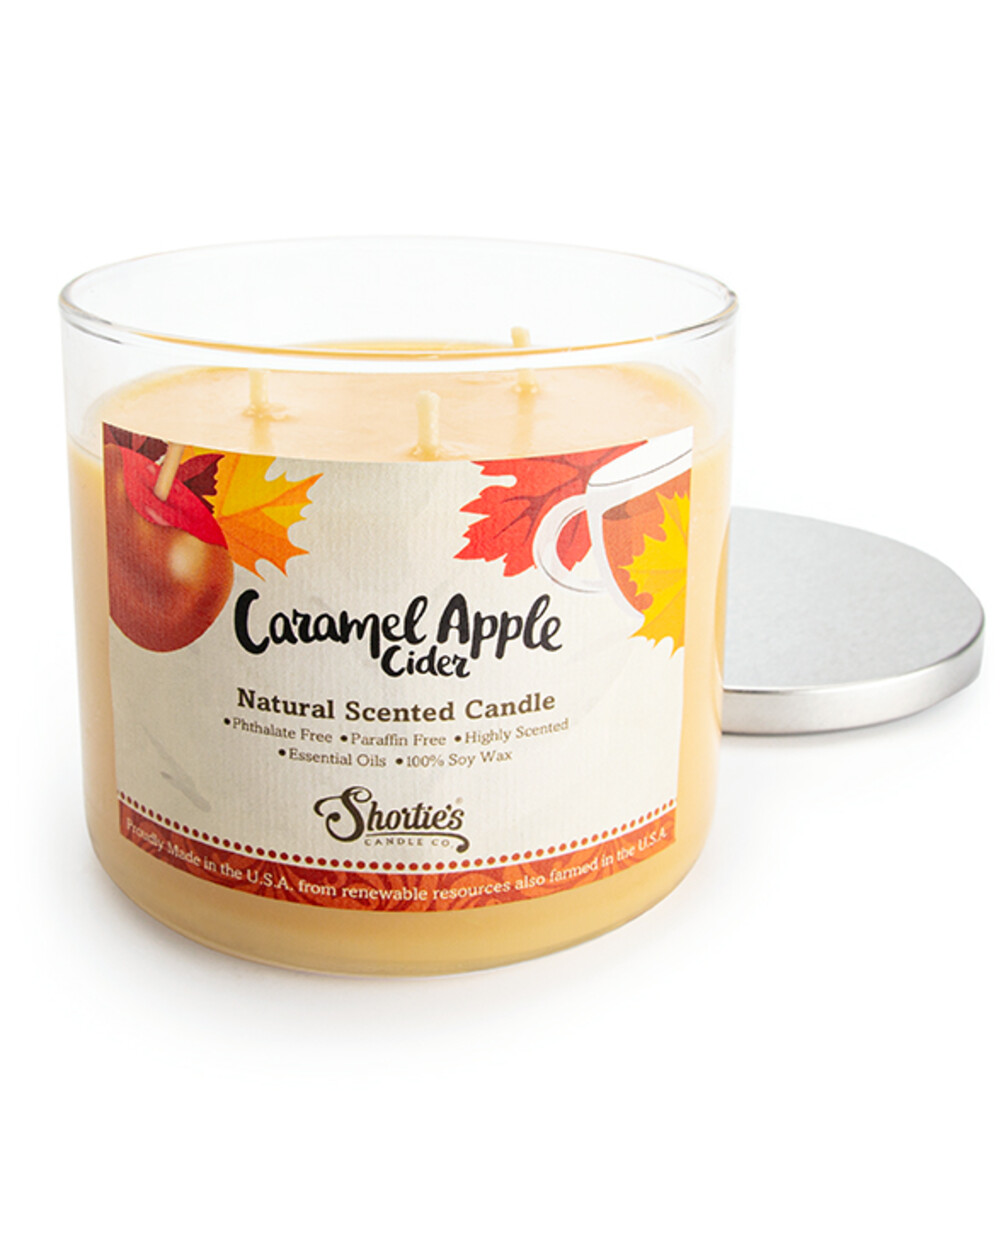 Apple Wax Melts Variety Pack - Apple Harvest, Caramel Apple, Apple Afternoon - Highly Scented + Natural Oils - Shortie's Candle Company, Size: 9 oz.